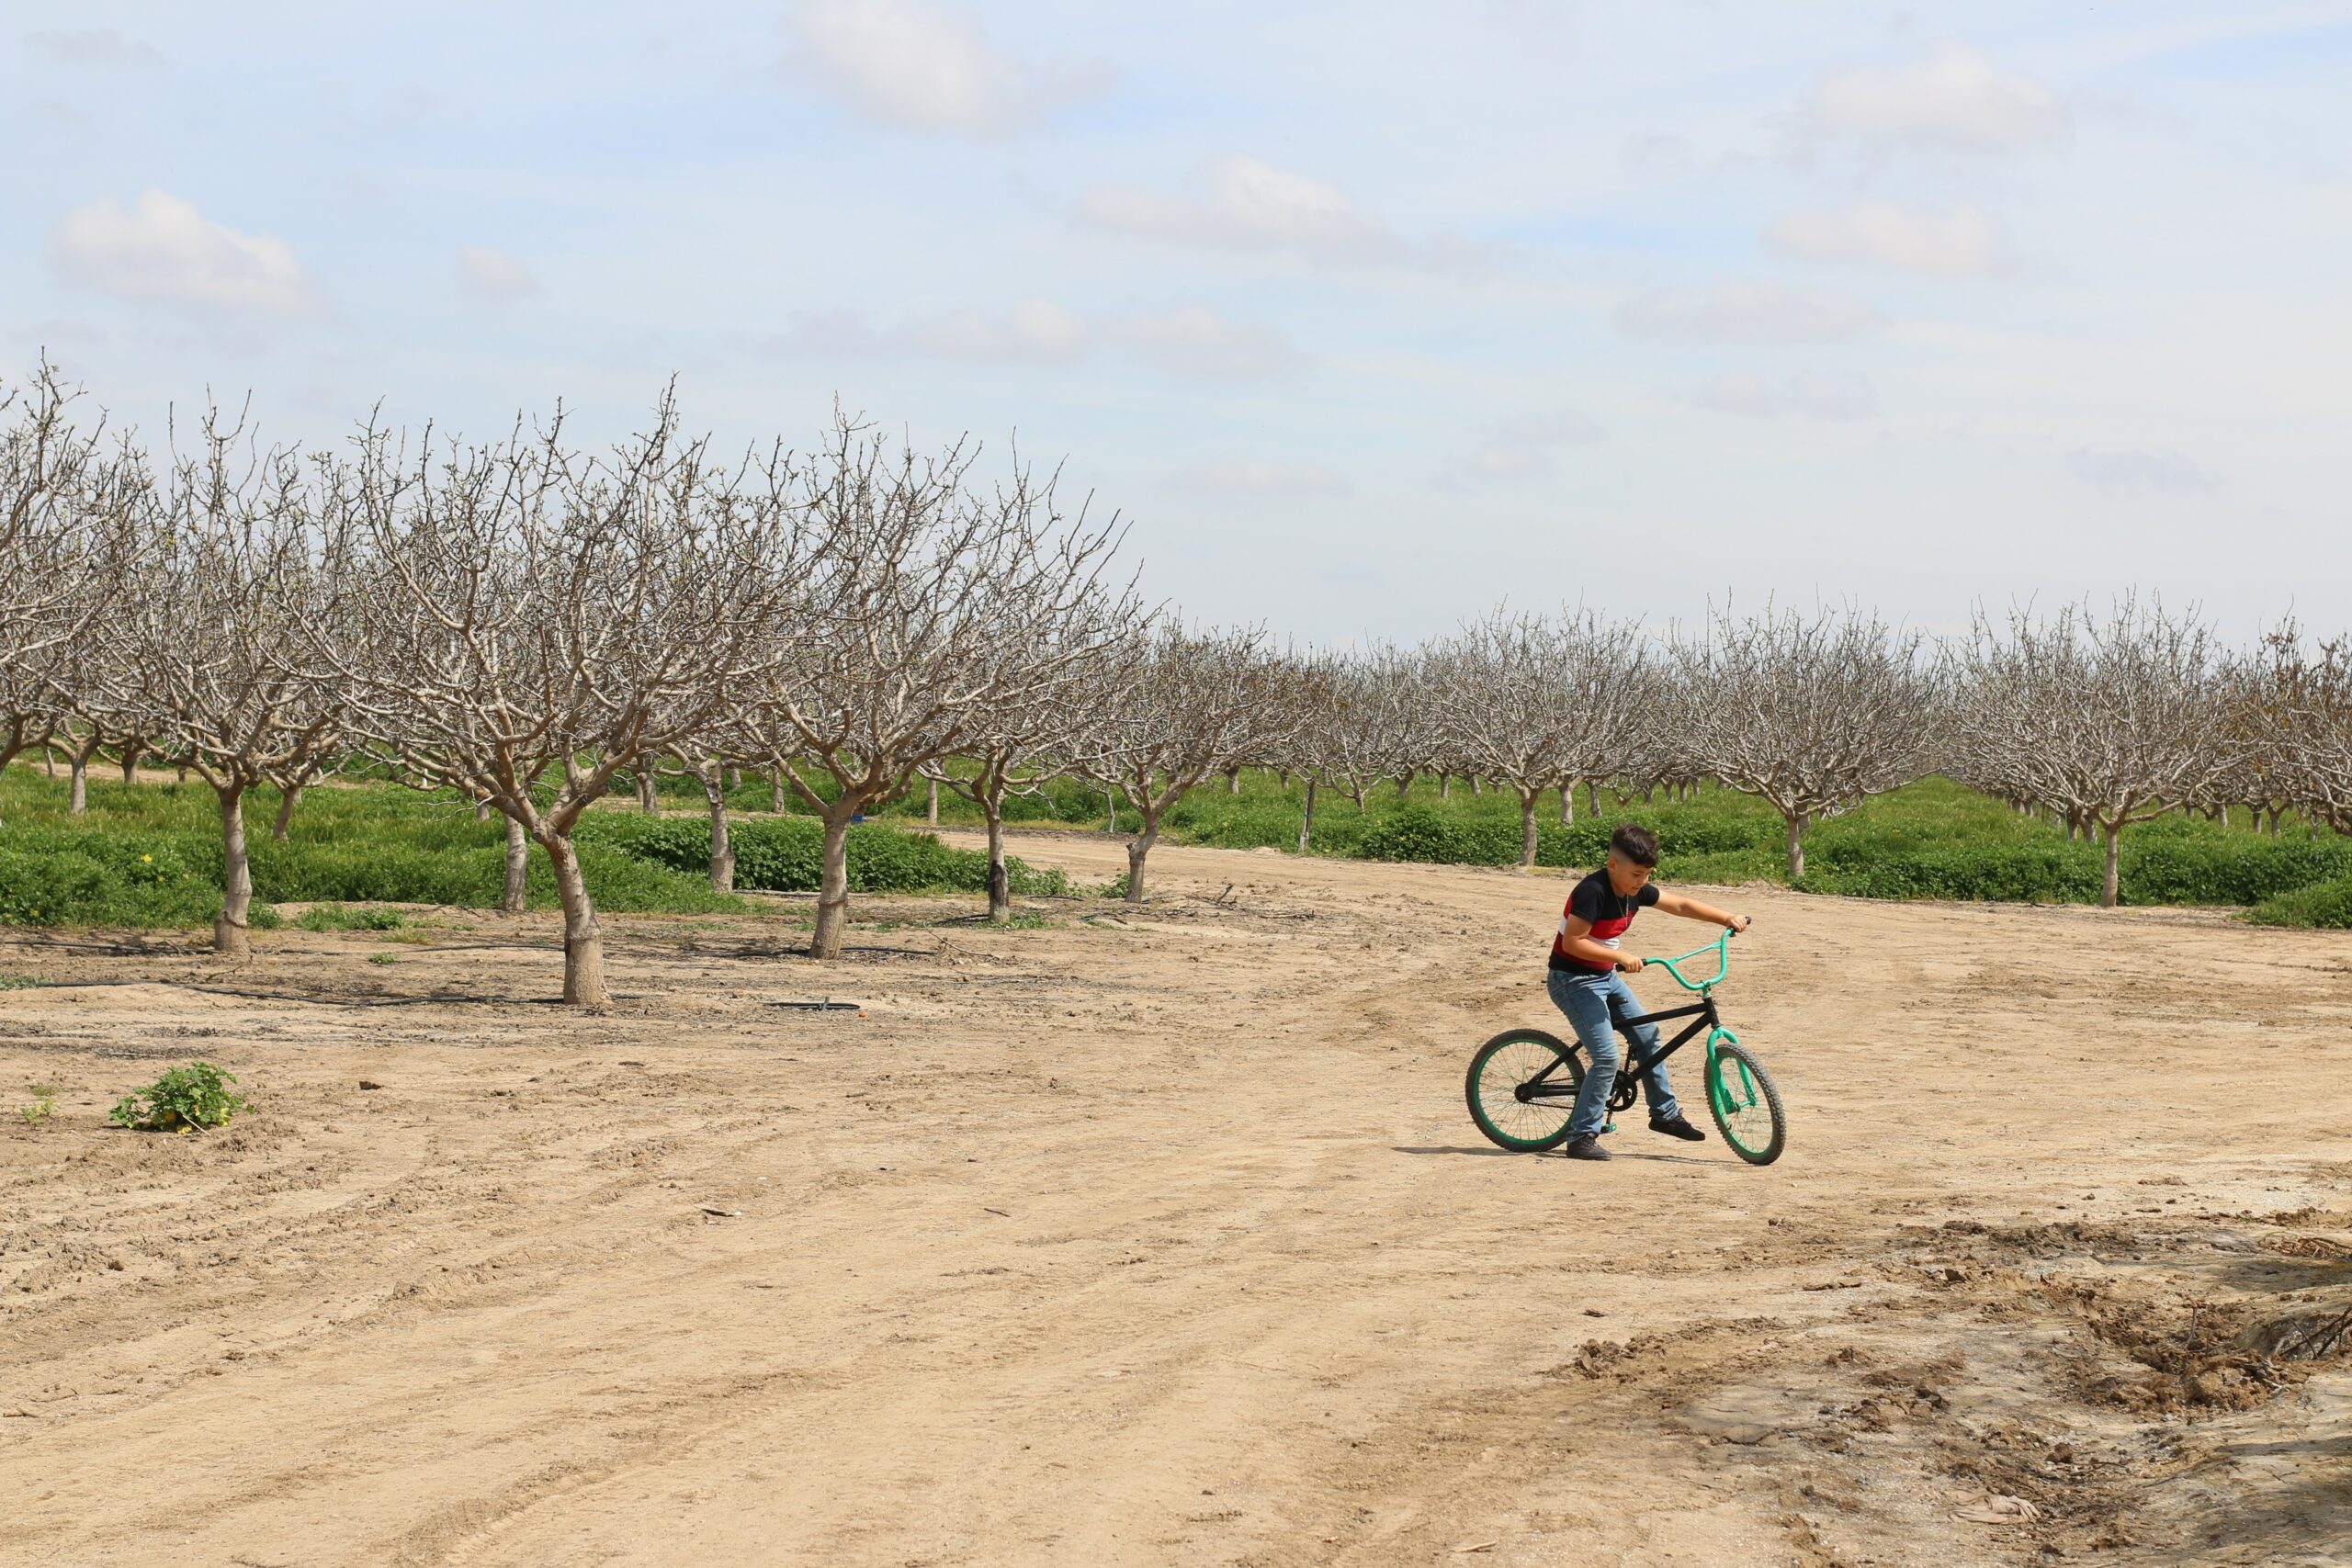 Pictured: A young child is pictured riding a bike through a dirt road in Arvin. Behind them, the sky is cloudy; there are small trees in the background.